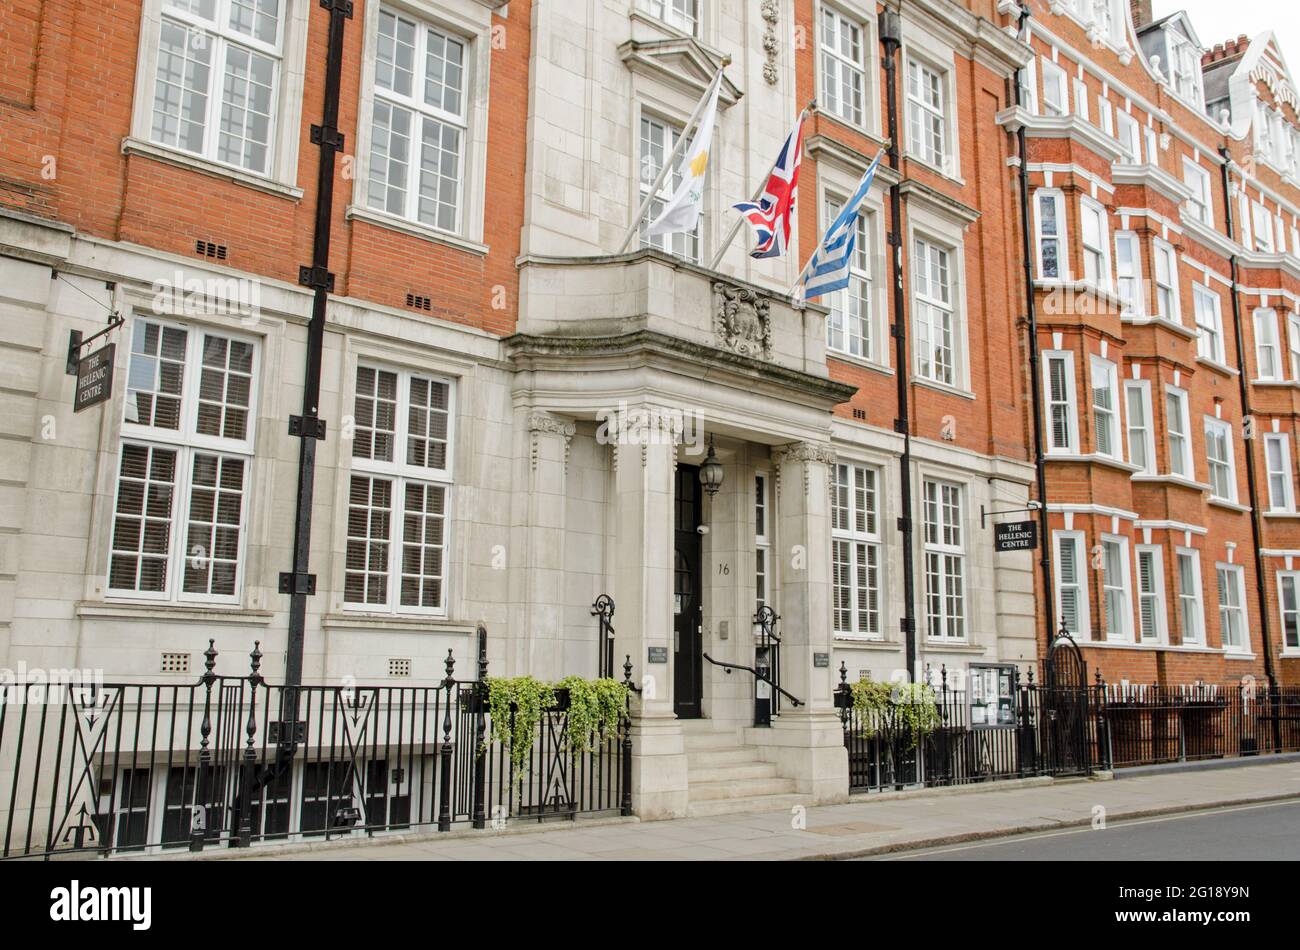 London, UK - April 16, 2021: Entrance to the Hellenic Centre in Marylebone, Central London.  The centre promotes Greek culture. Stock Photo